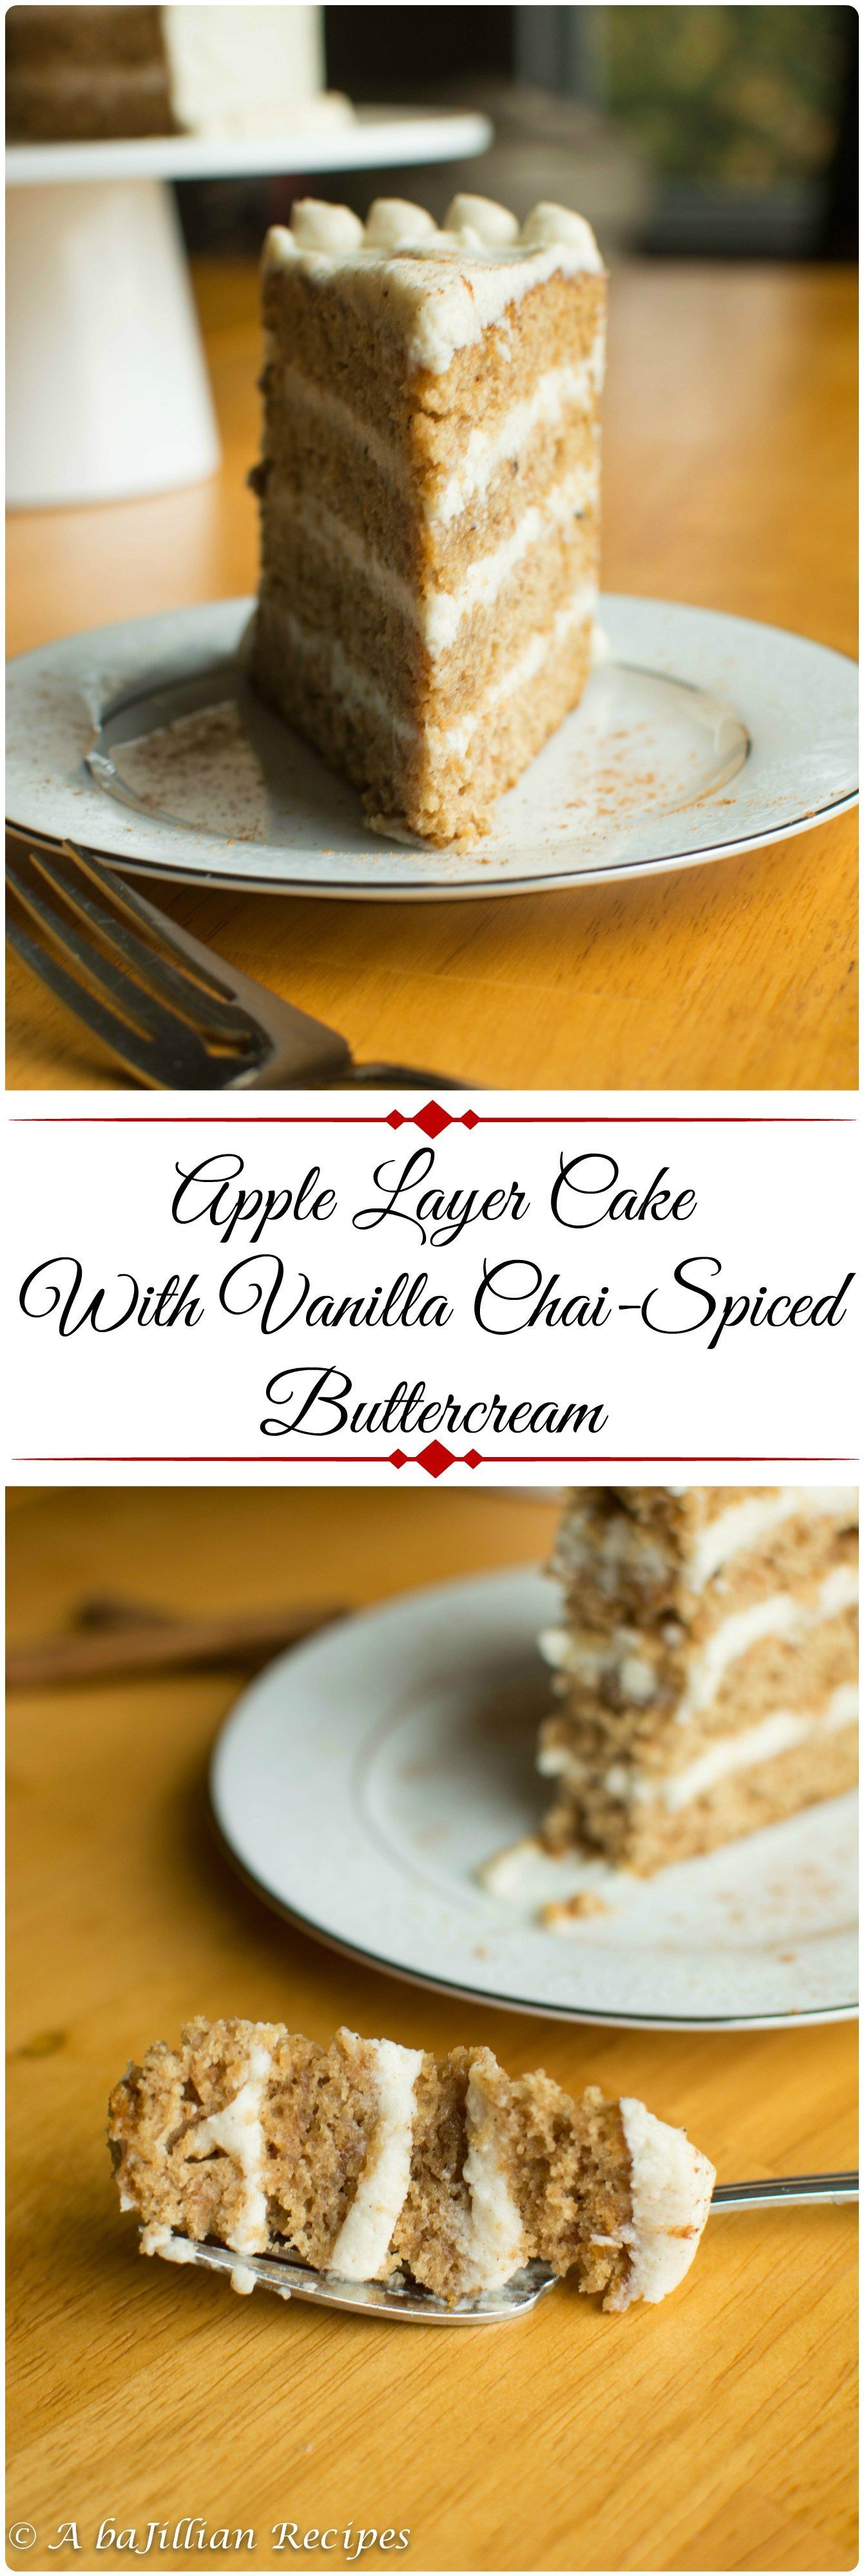 Apple Layer Cake with Vanilla Chai-Spiced Buttercream -   17 gourmet cake Flavors ideas